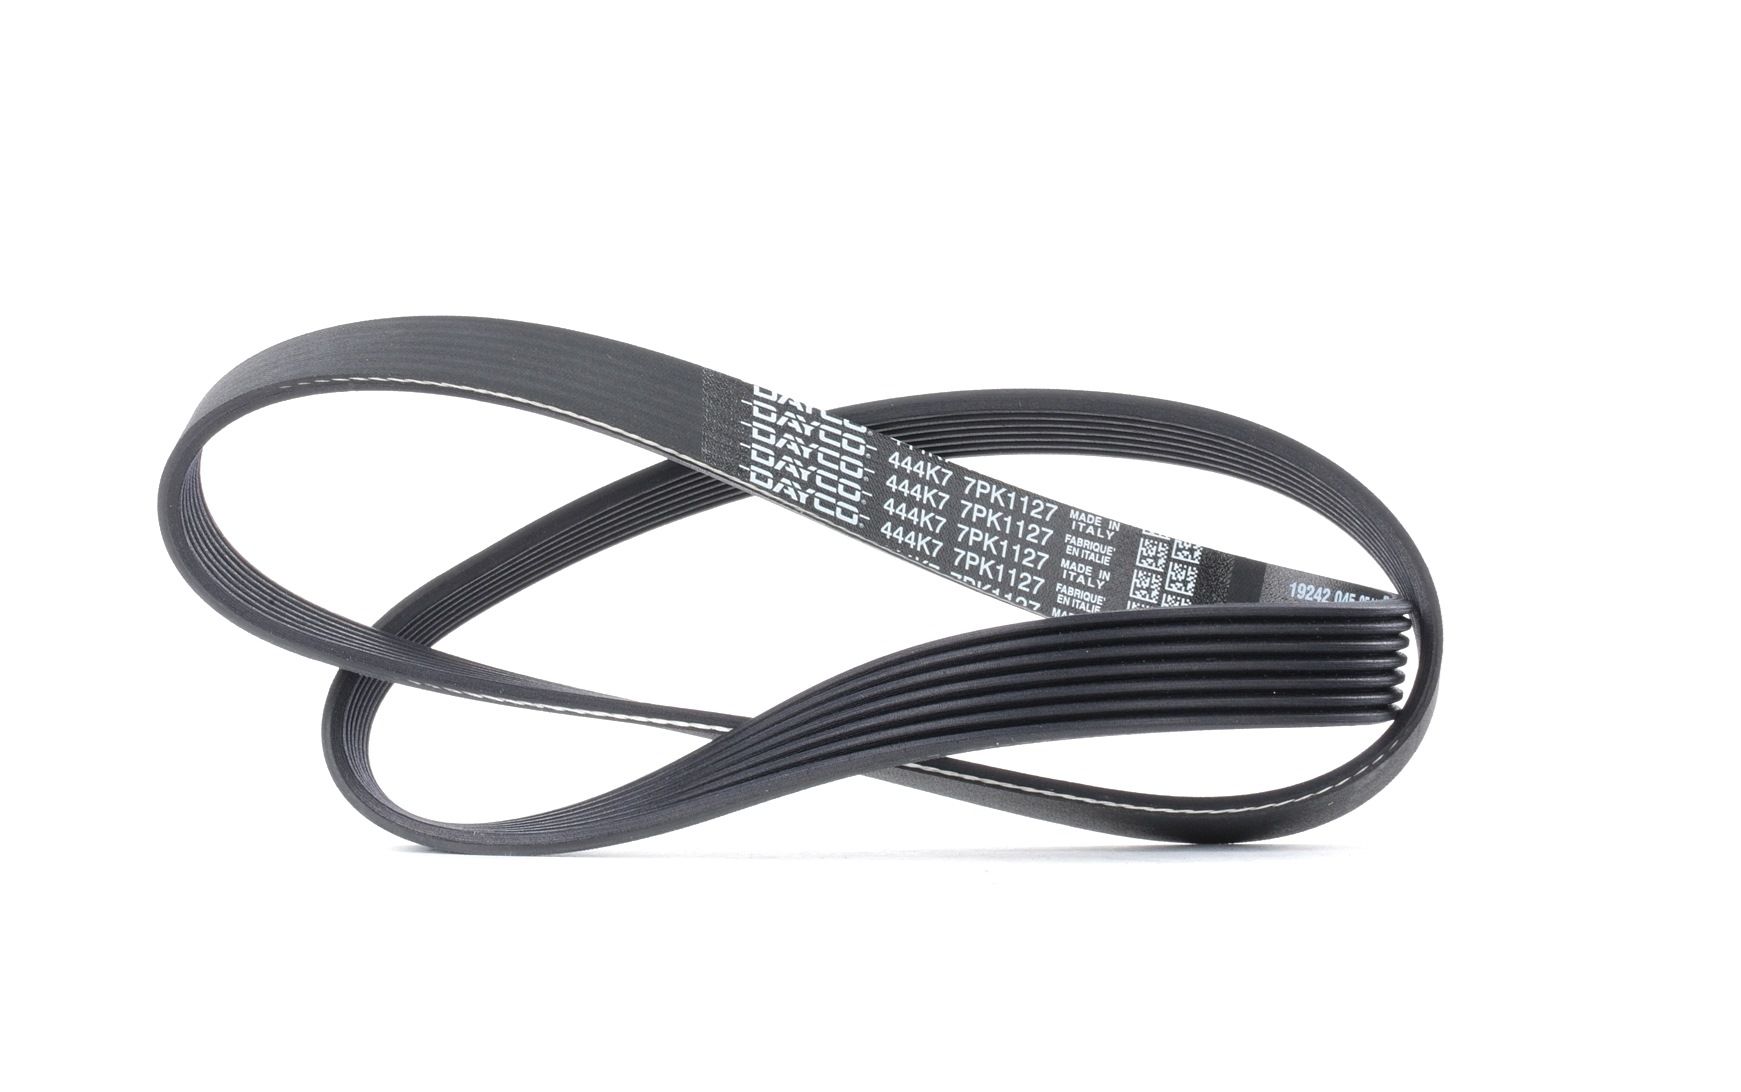 Great value for money - DAYCO Serpentine belt 7PK1127